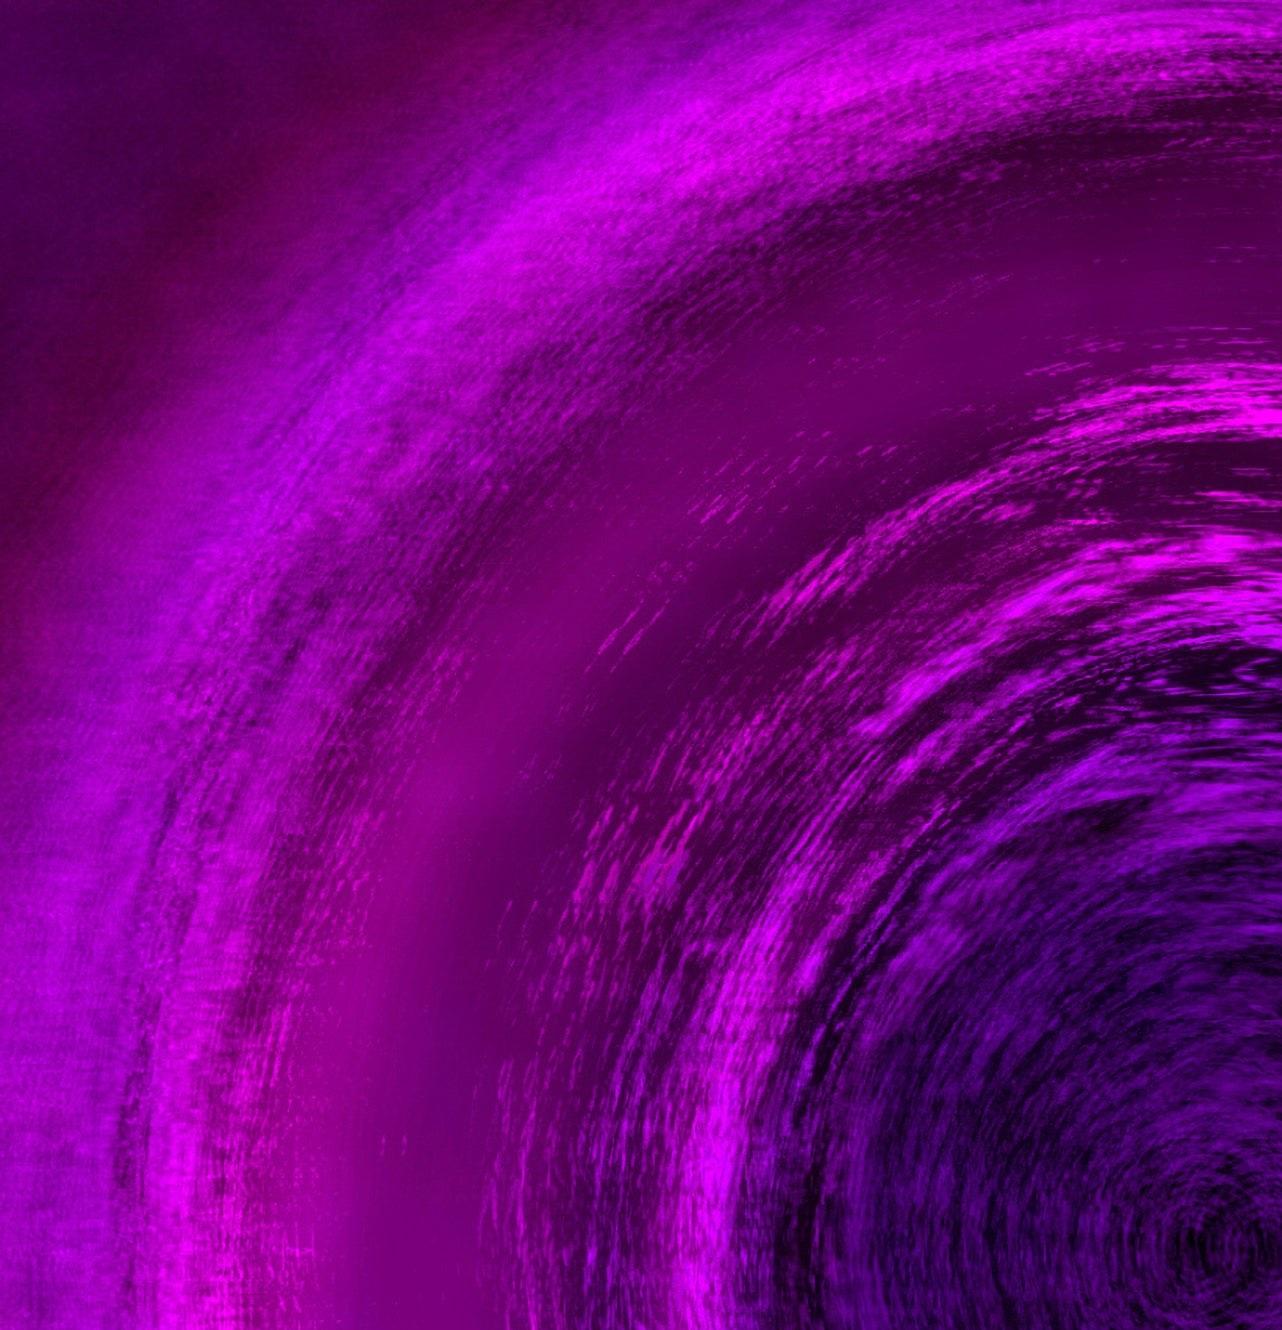 Heuristic #05 [Purple, Pink, 3D, Lenticular, New media, Circle, Galaxy, Space] - New Media Mixed Media Art by Sungyong Hong